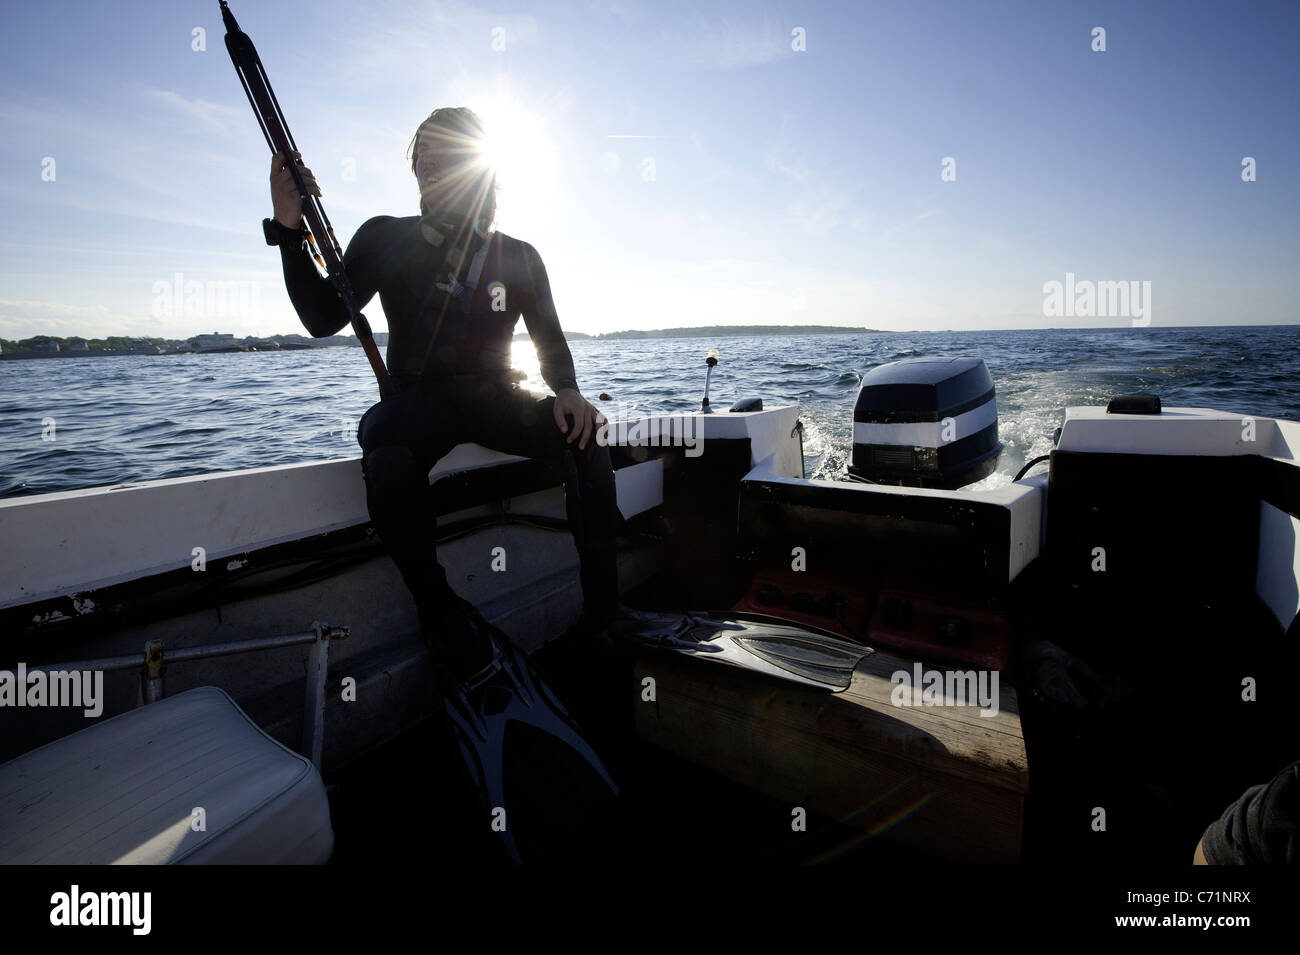 A man gets his spearfishing gear ready as the sun begins to set Stock Photo  - Alamy